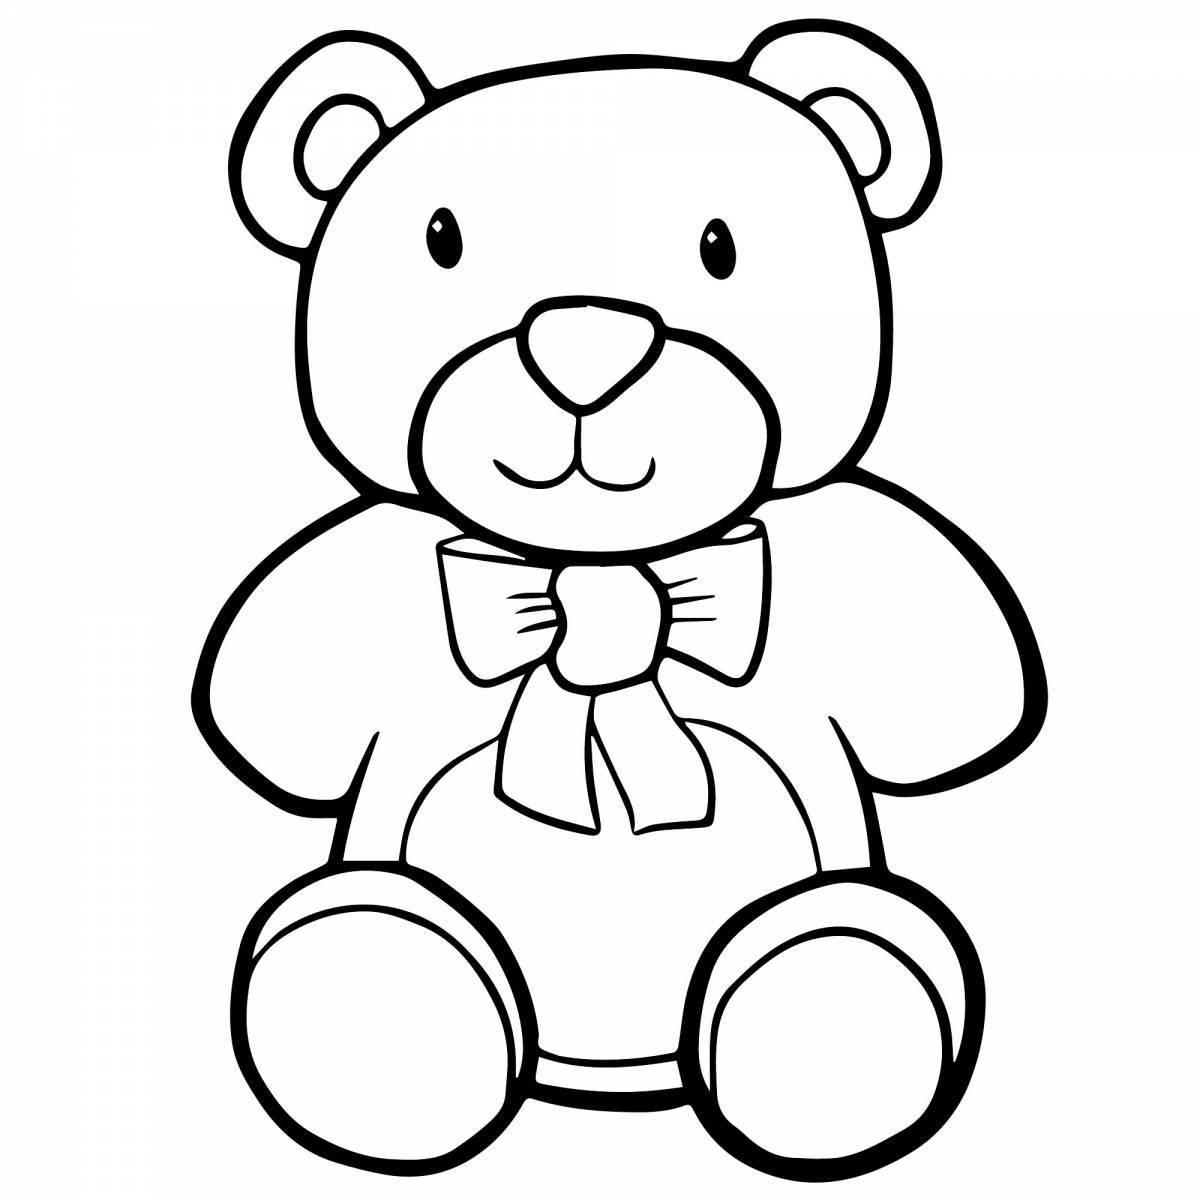 Adorable teddy bear coloring page